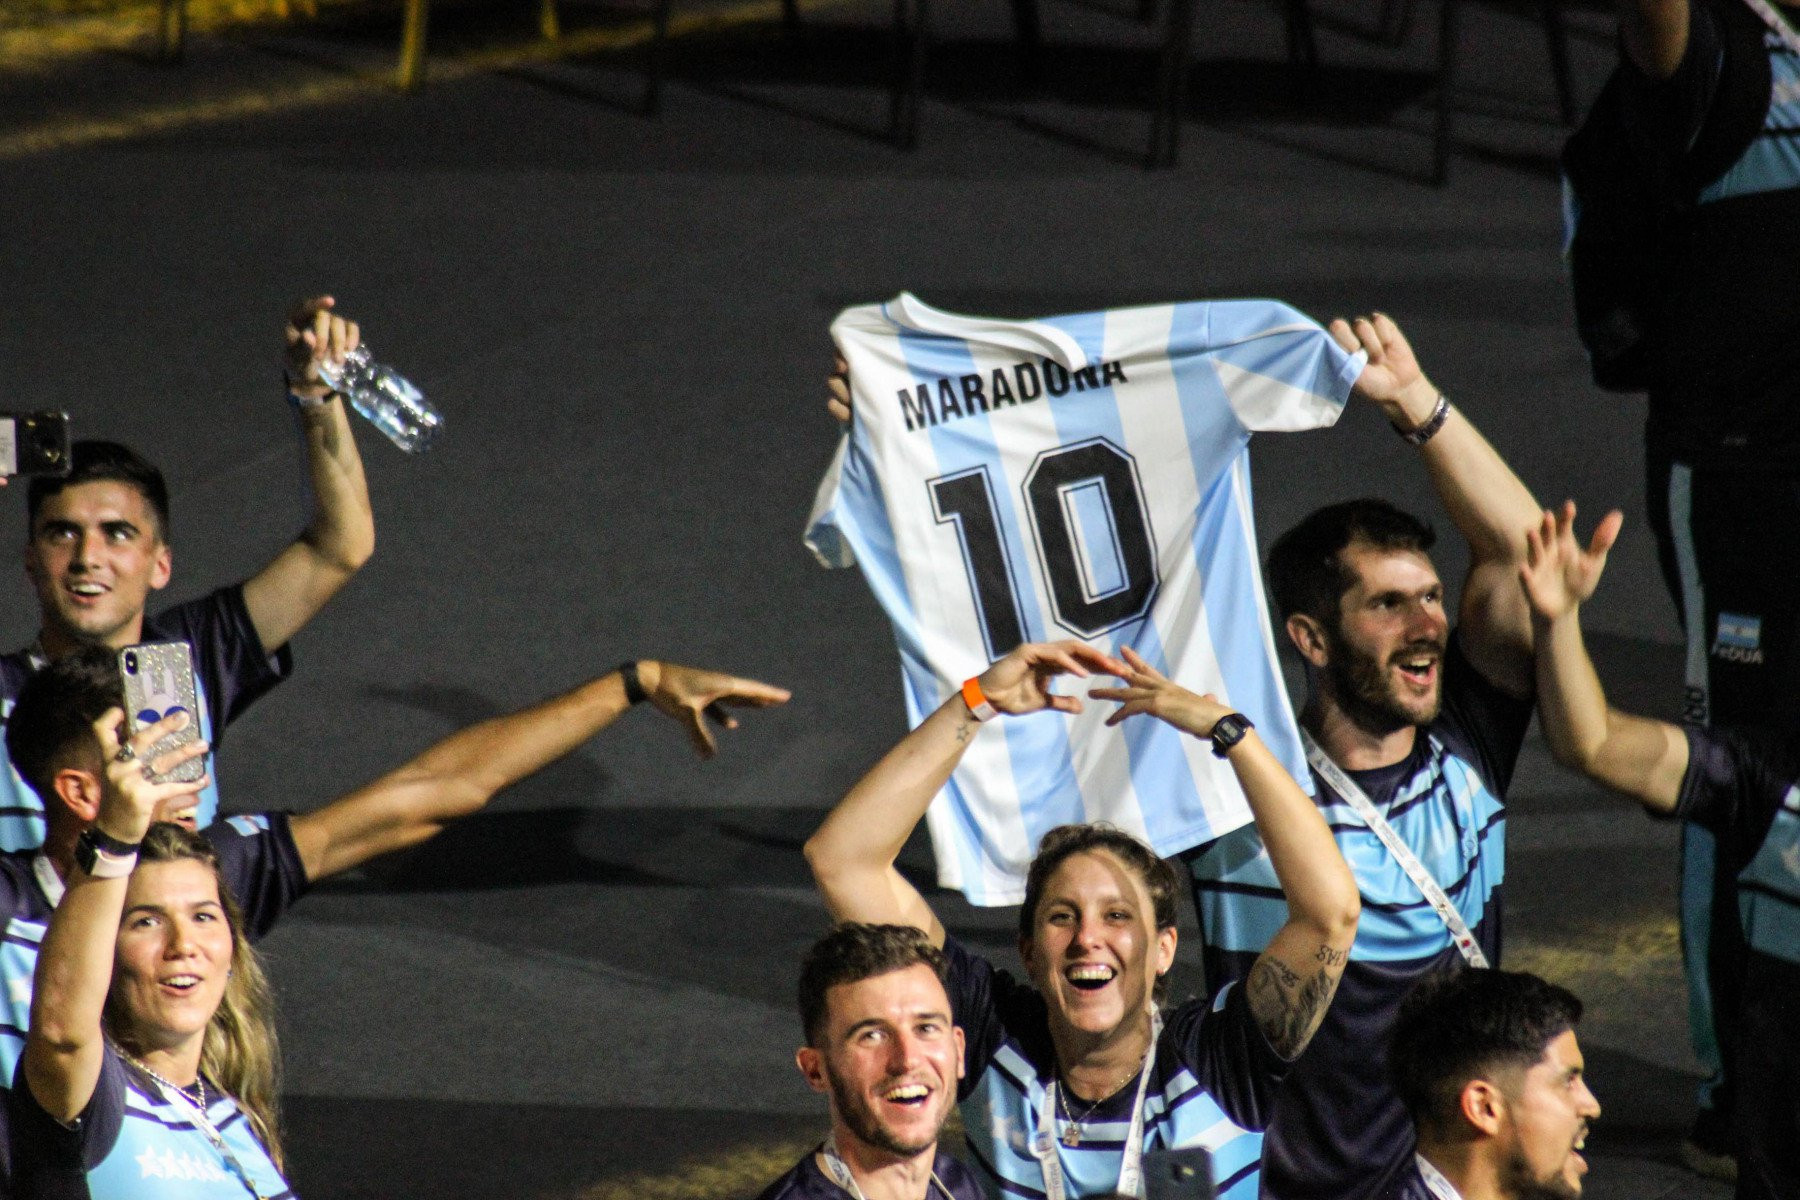 The Argentinian team held aloft a Diego Maradona shirt when they entered the stadium during the Naples 2019 Opening Ceremony ©Naples 2019